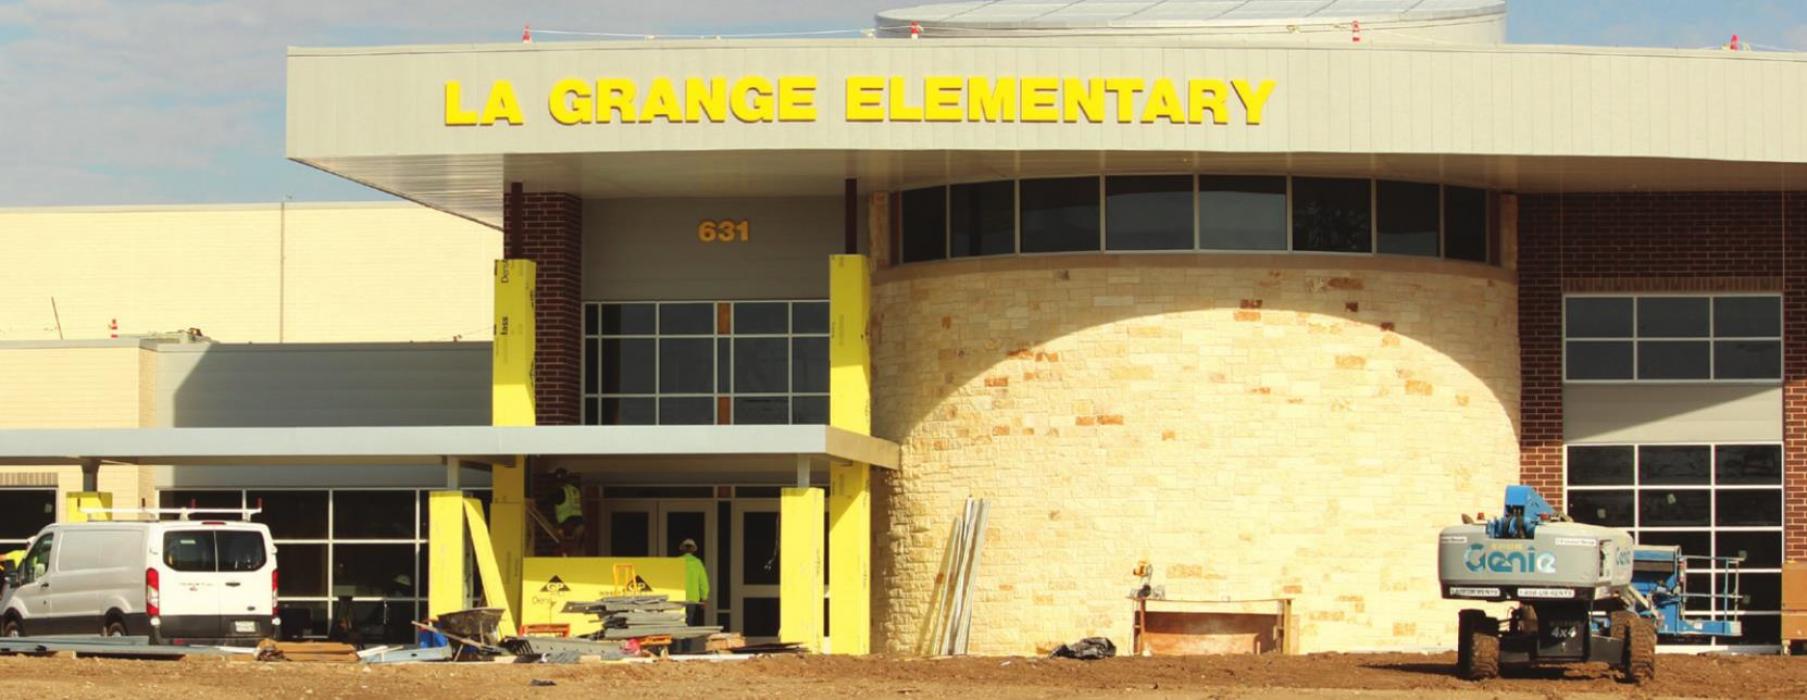 The new La Grange Elementary building is getting its final touches, including signage last week.